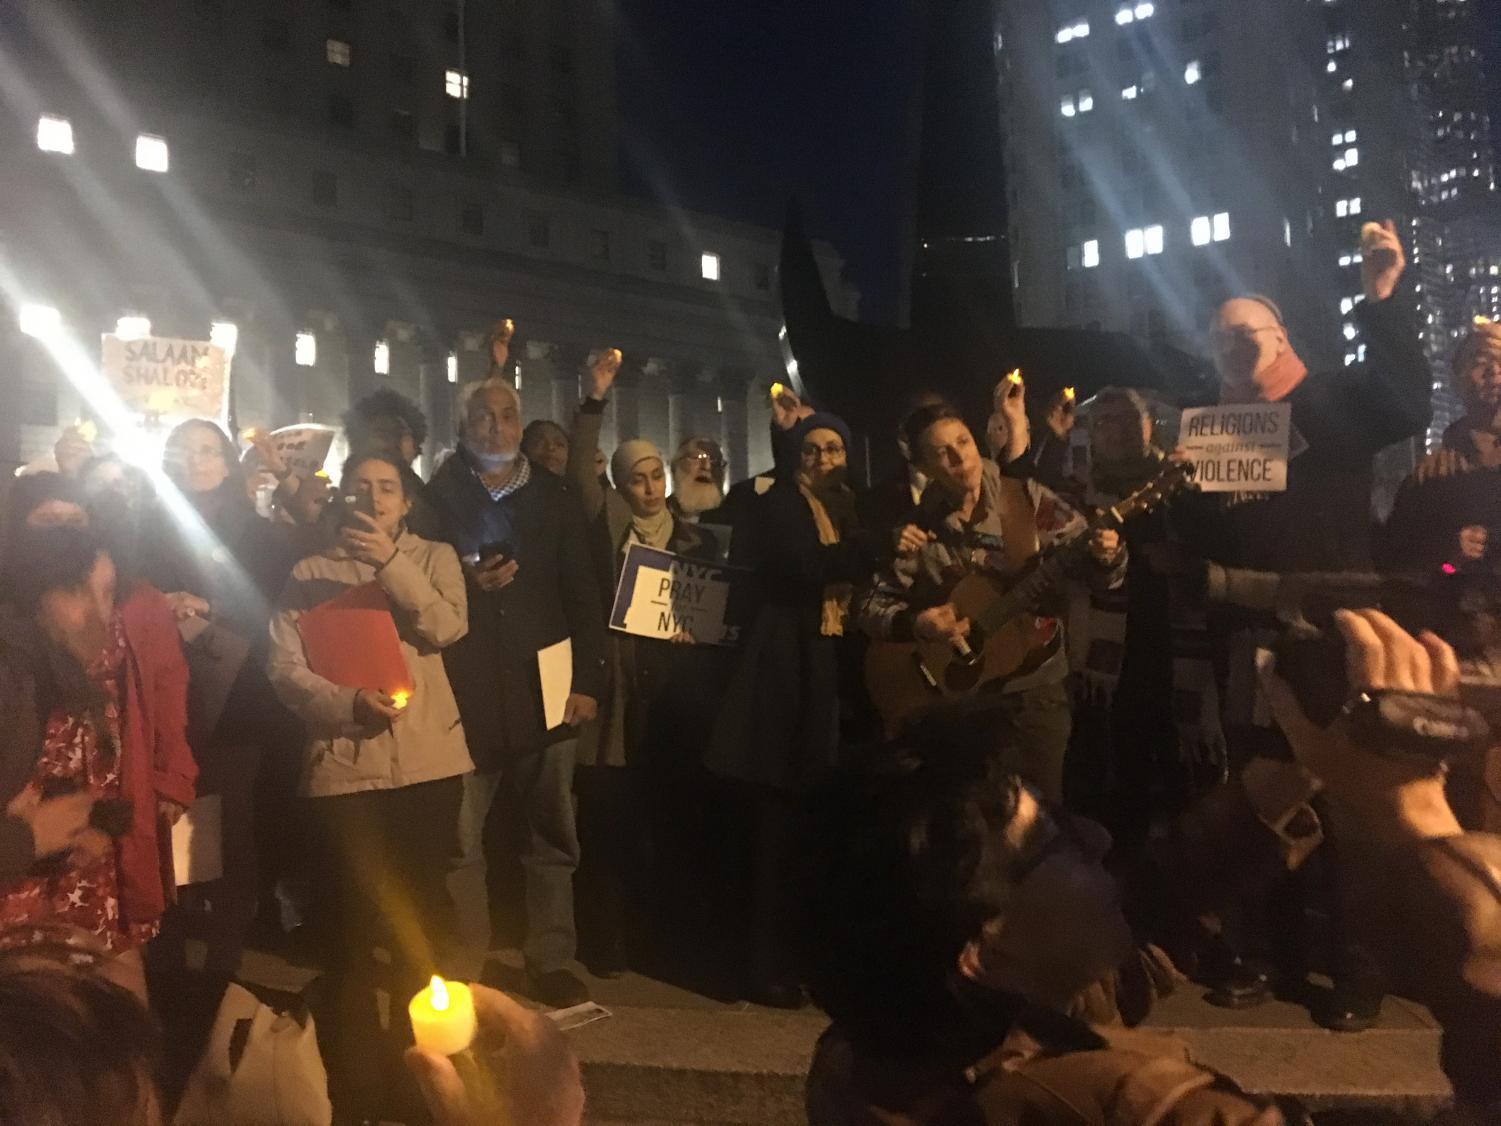 NYC+Holds+Interfaith+Vigil+for+Victims+of+TriBeCa+Attack